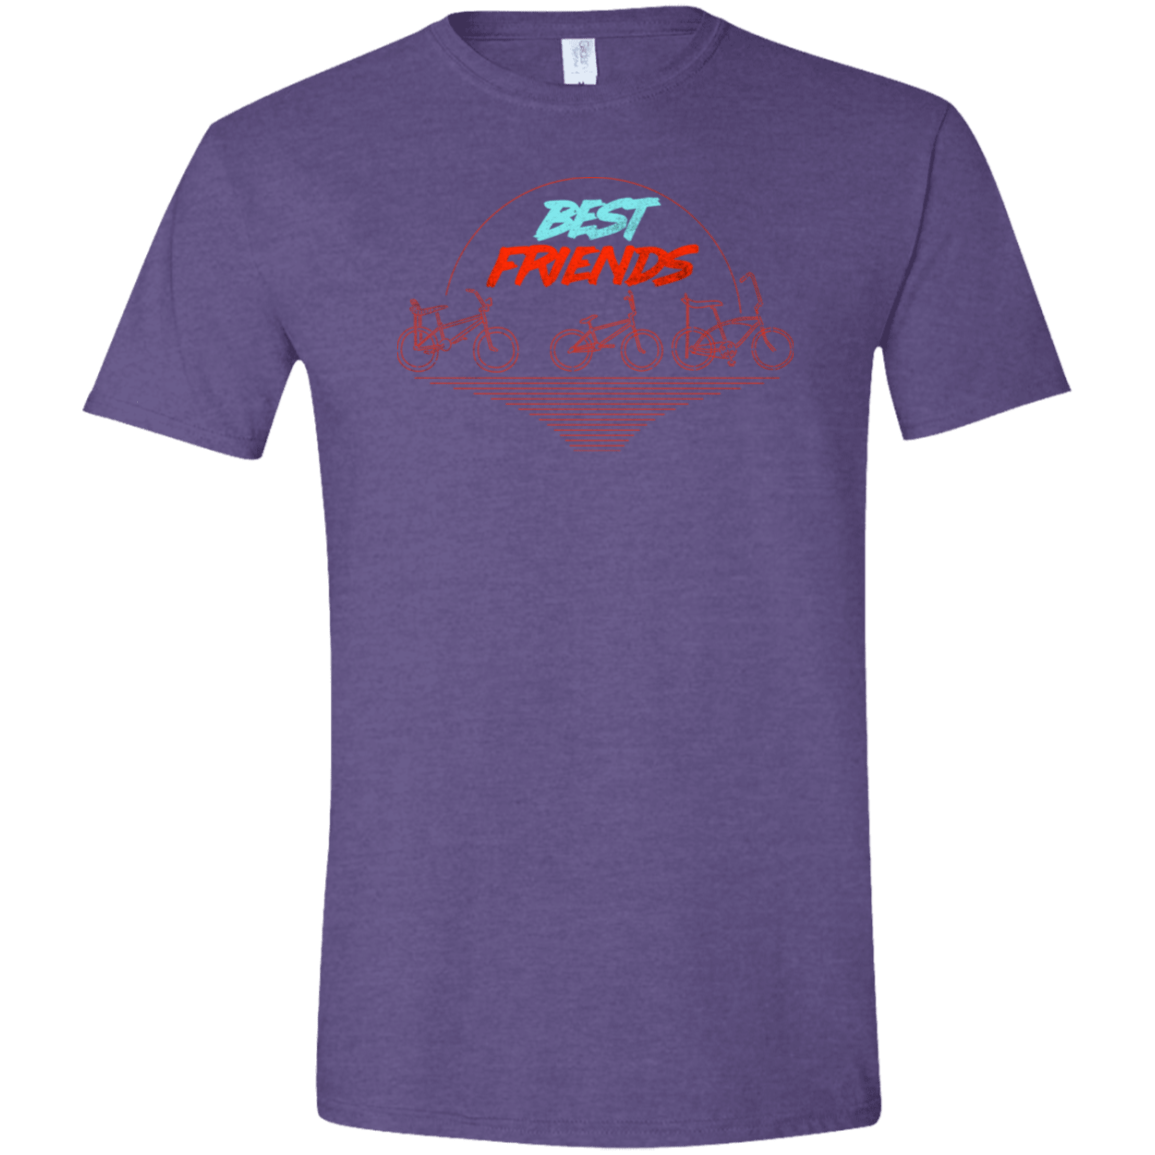 T-Shirts Heather Purple / S Best Friends Men's Semi-Fitted Softstyle